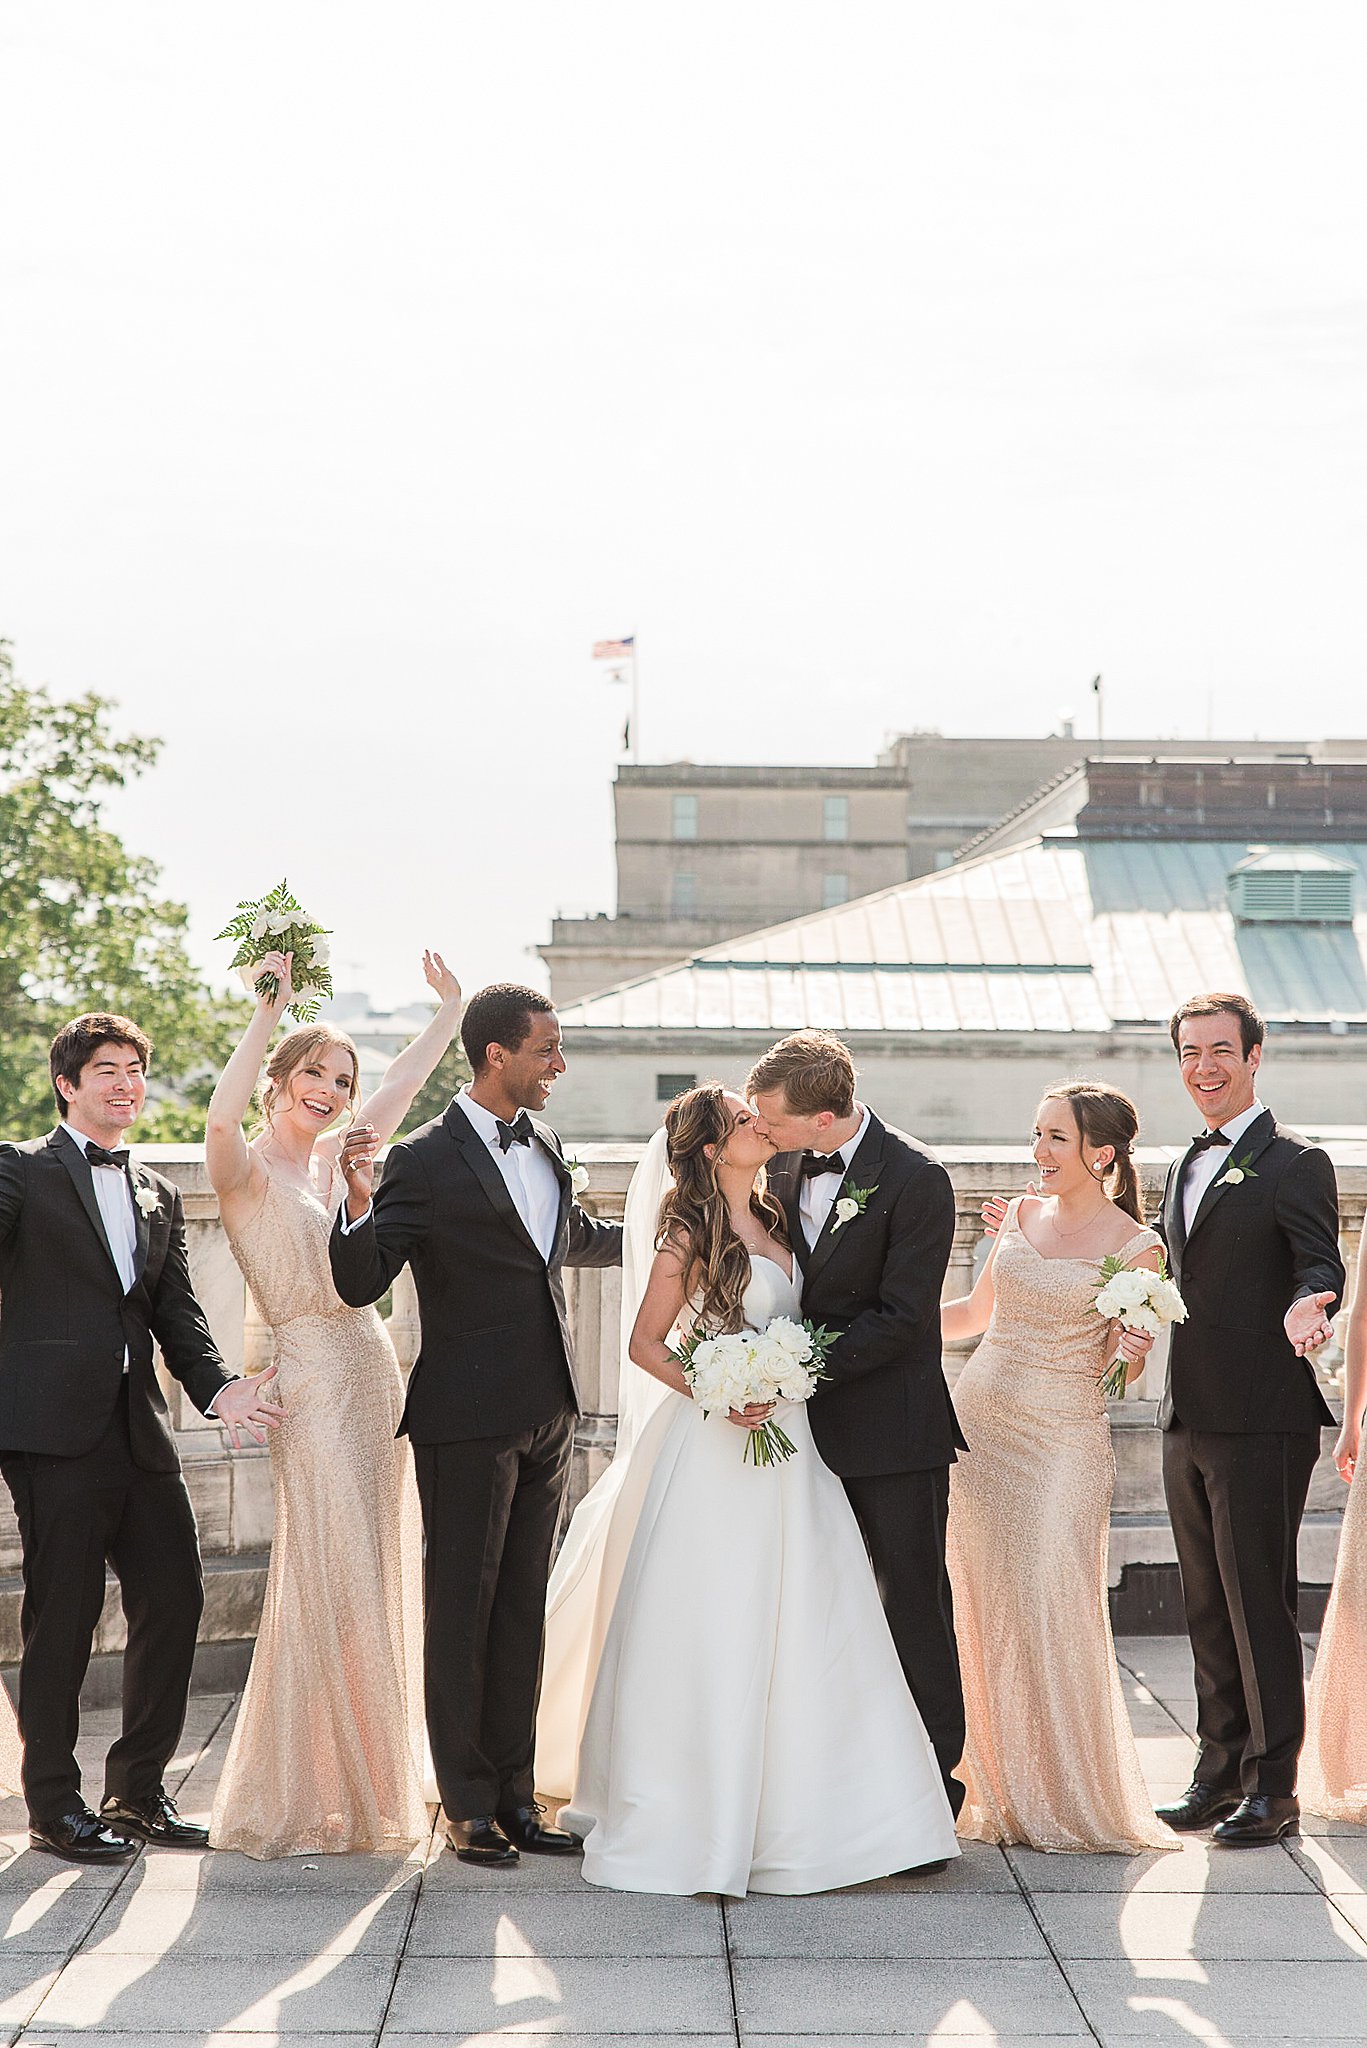 Newlyweds kiss while their wedding party celebrates on a rooftop at one of the Industrial wedding venues Baltimore